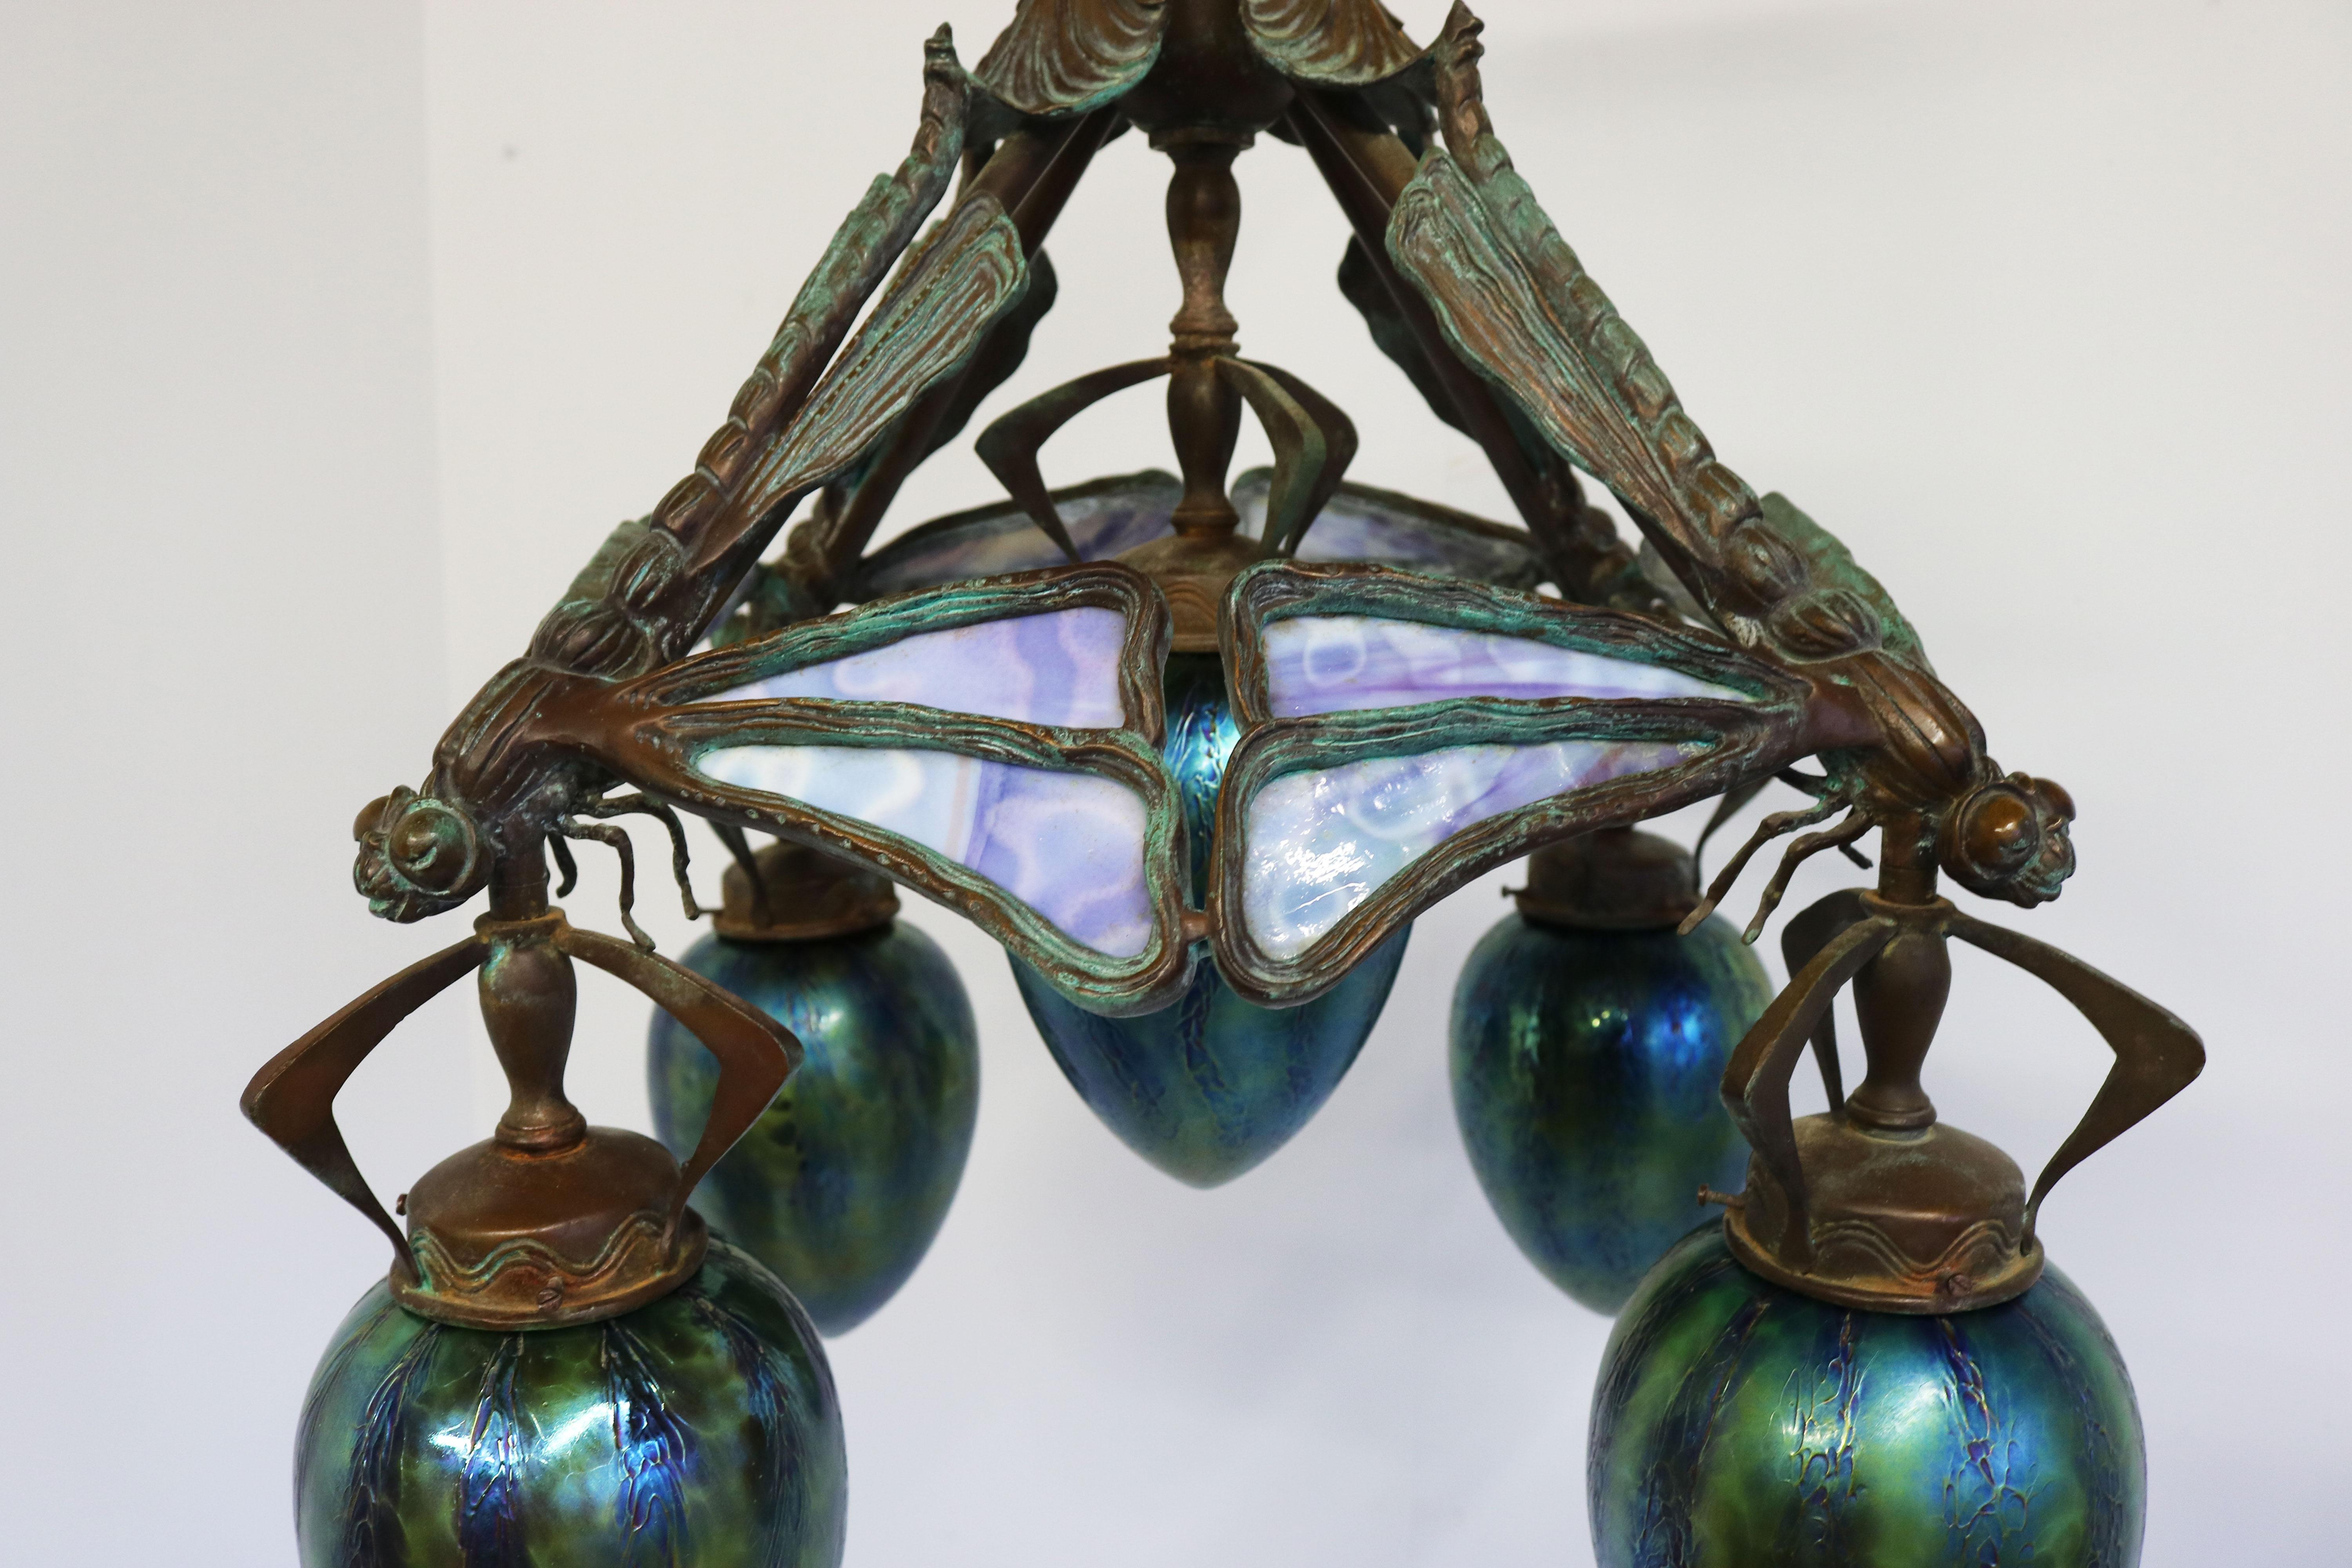 Early 20th Century French Art Nouveau dragonfly chandelier 1900 Jugendstil Bronze Iridescent Glass